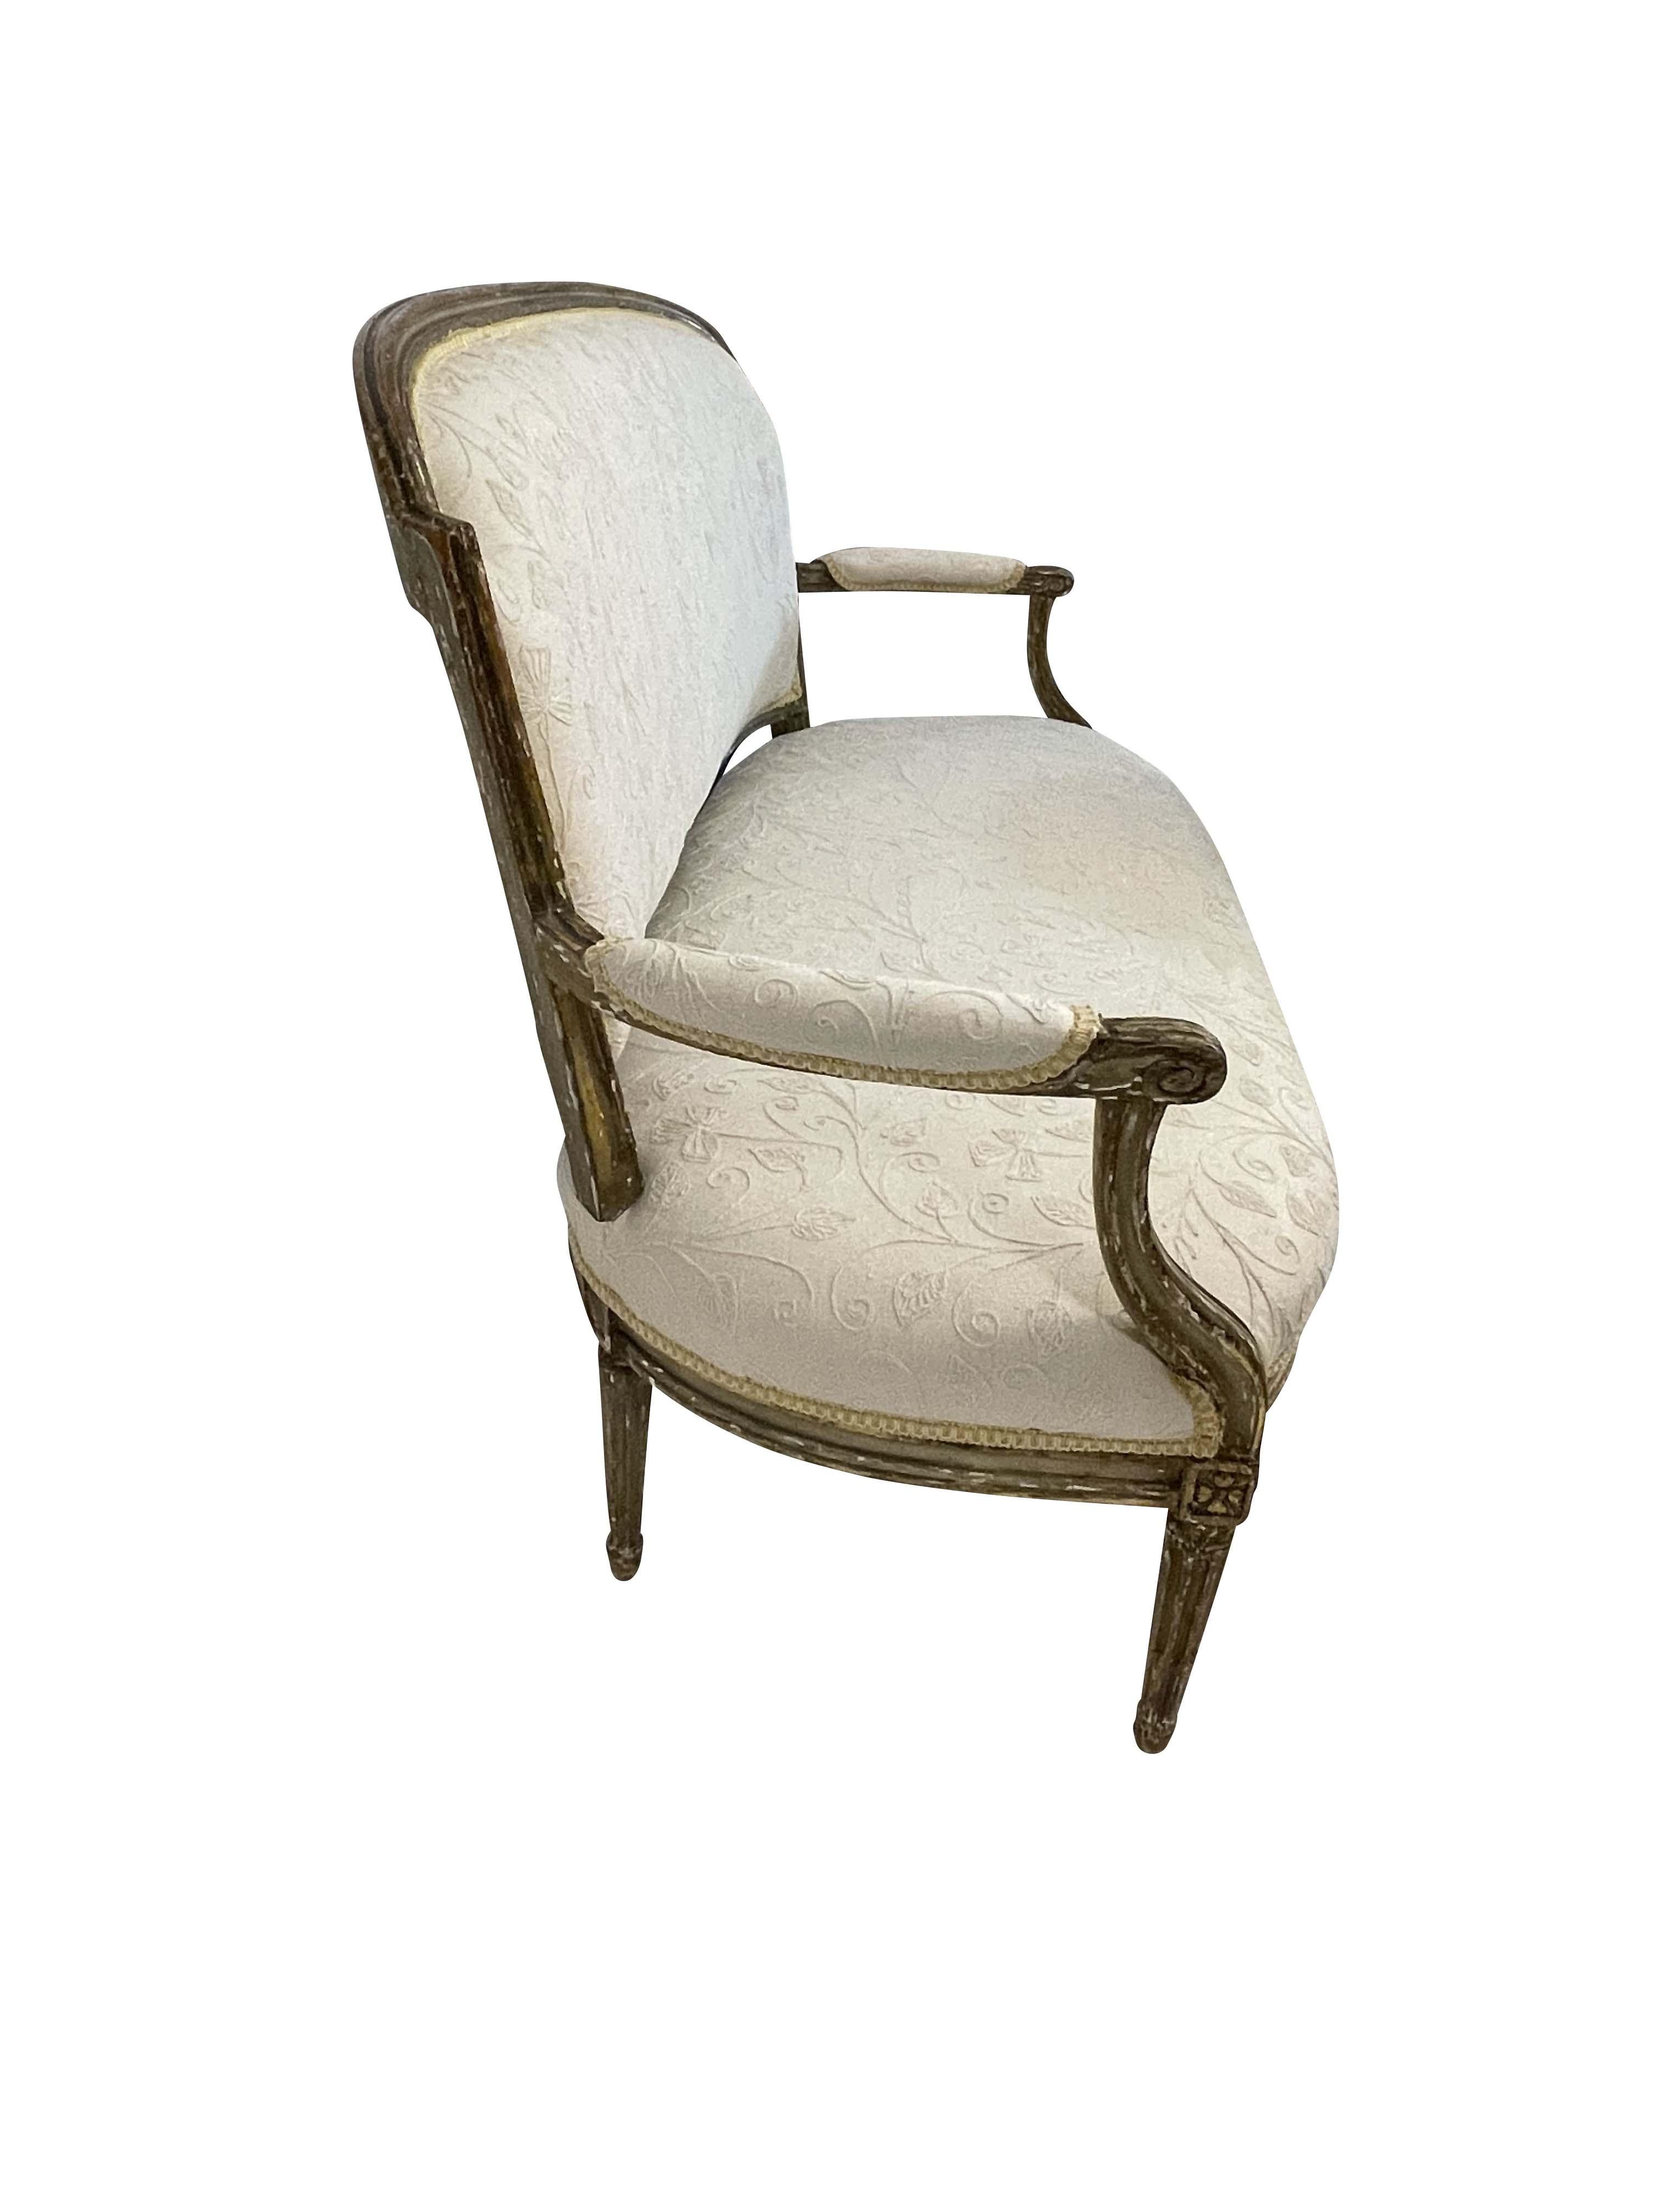 19th Century Louis XVI Style Giltwood Settee  For Sale 1